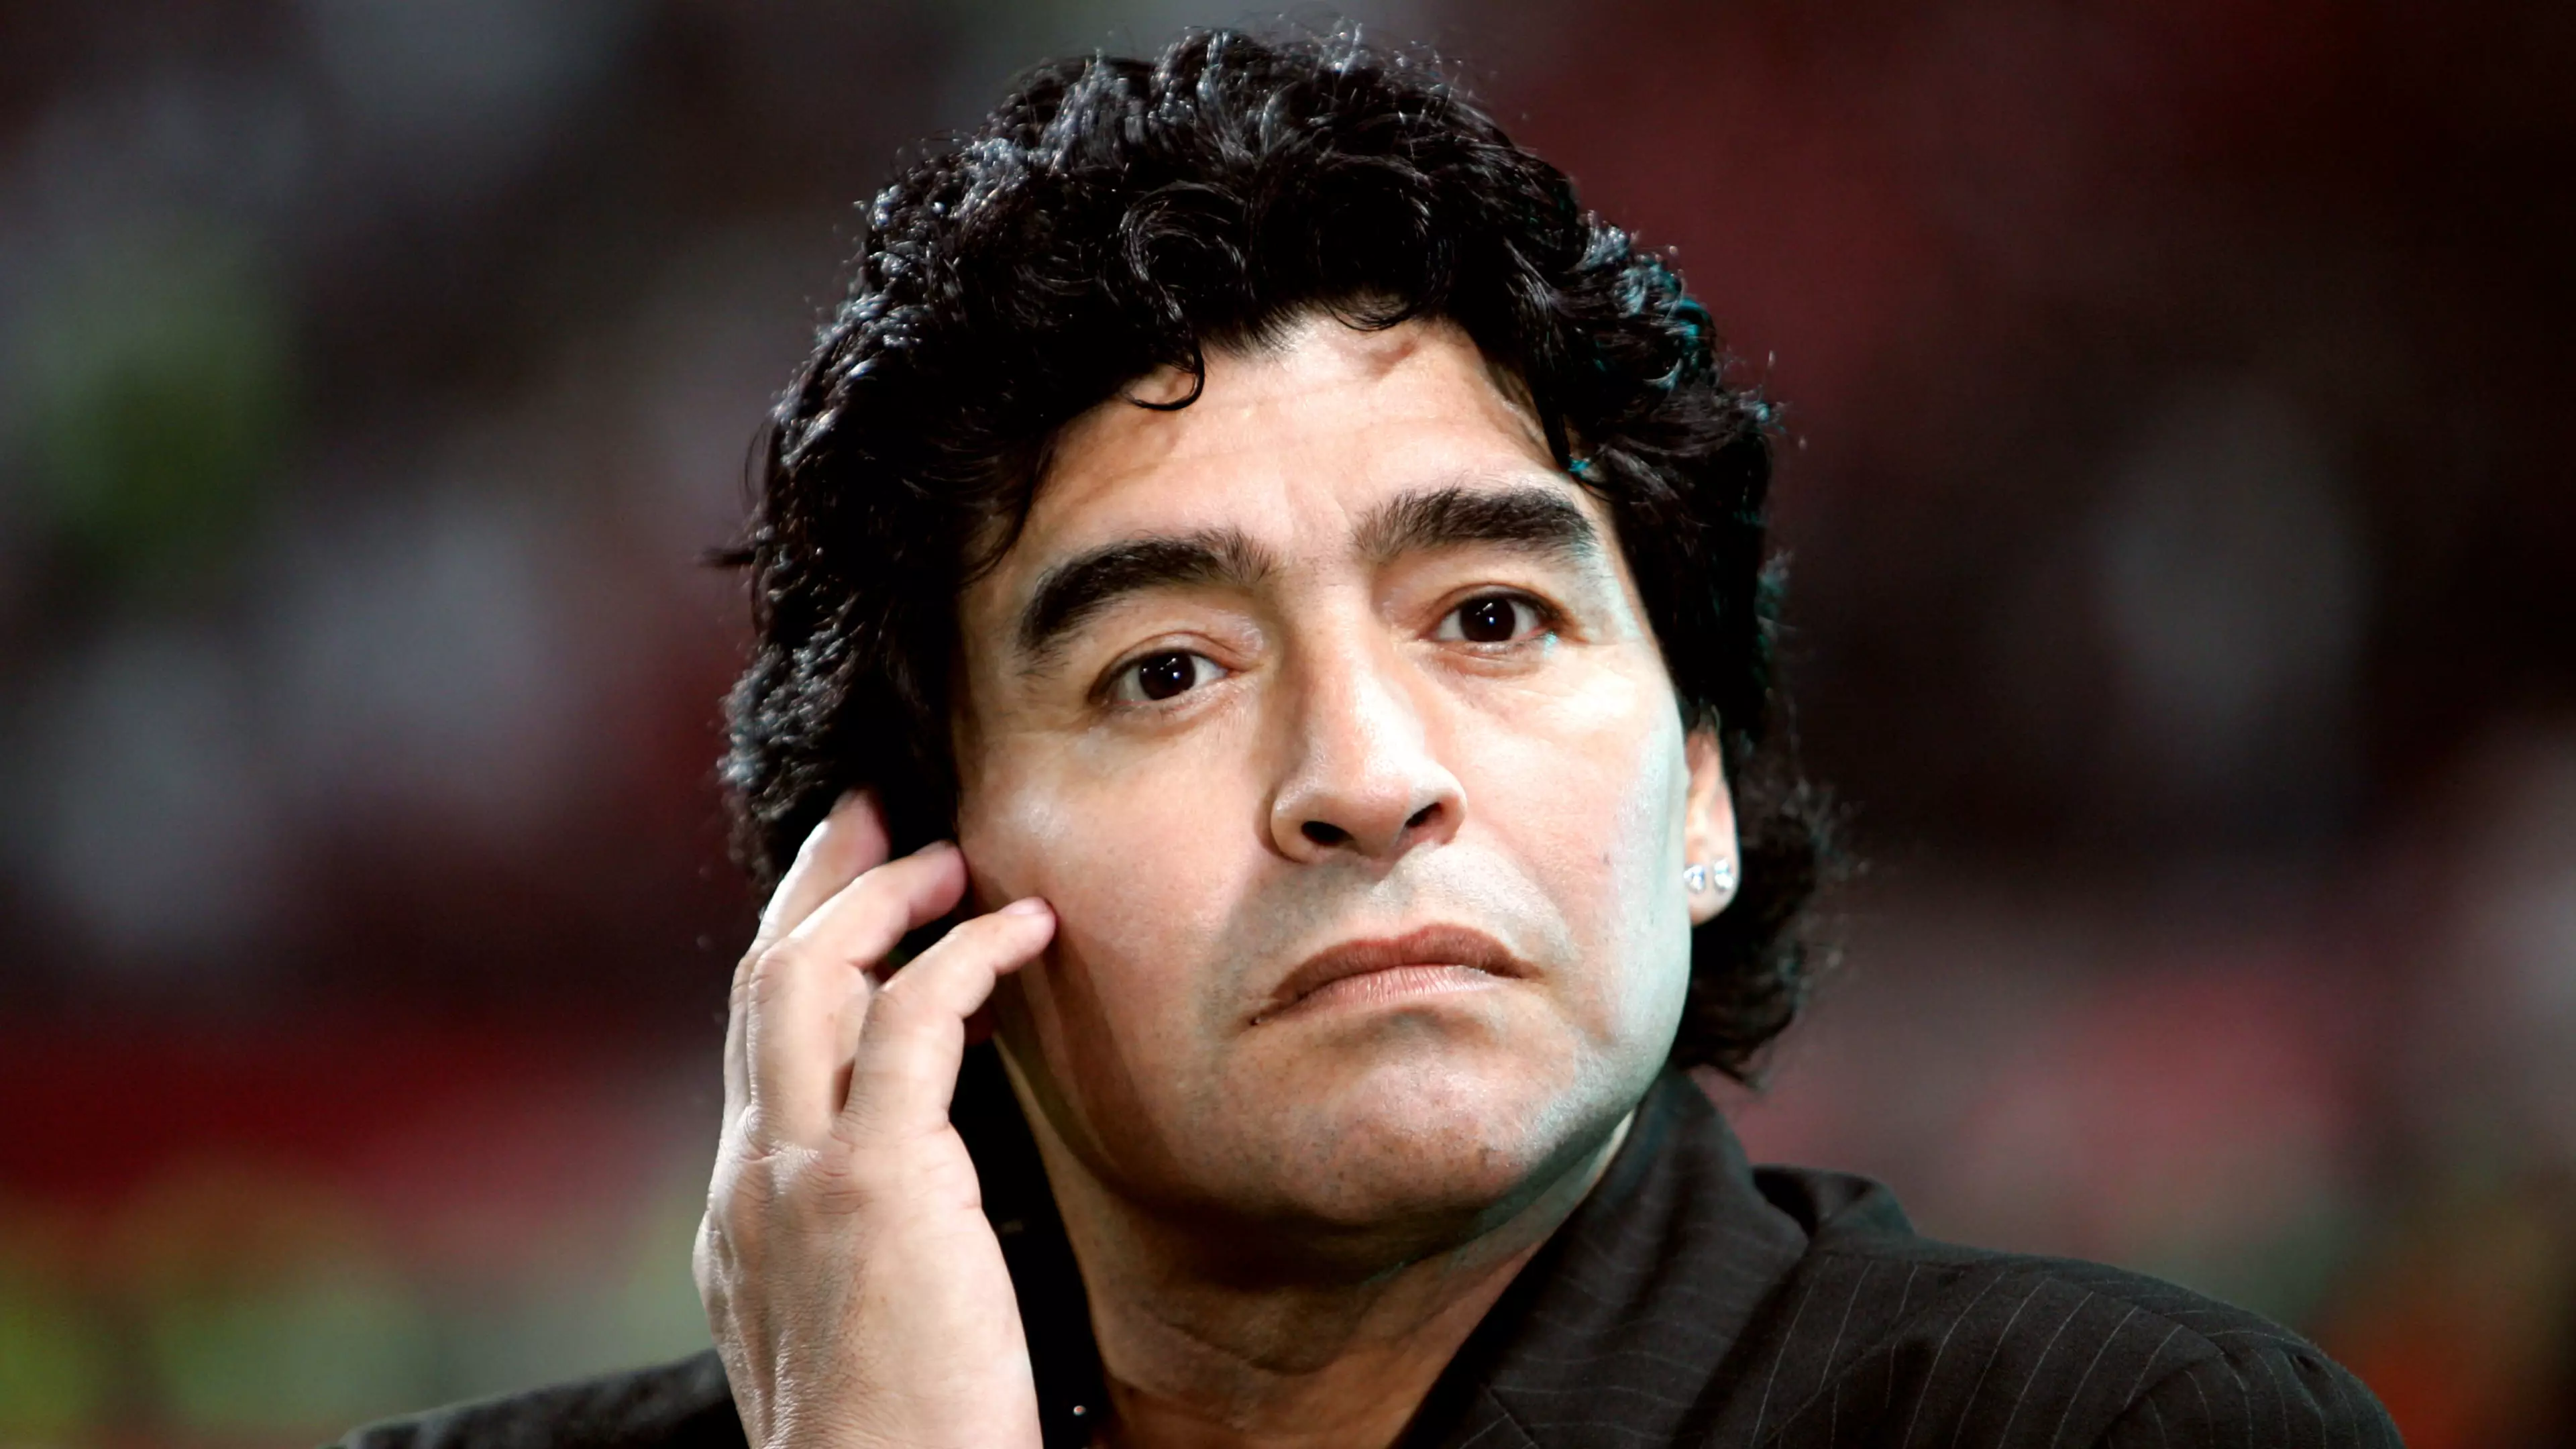 Diego Maradona Funeral Worker Fired After Taking Selfie Next To His Body